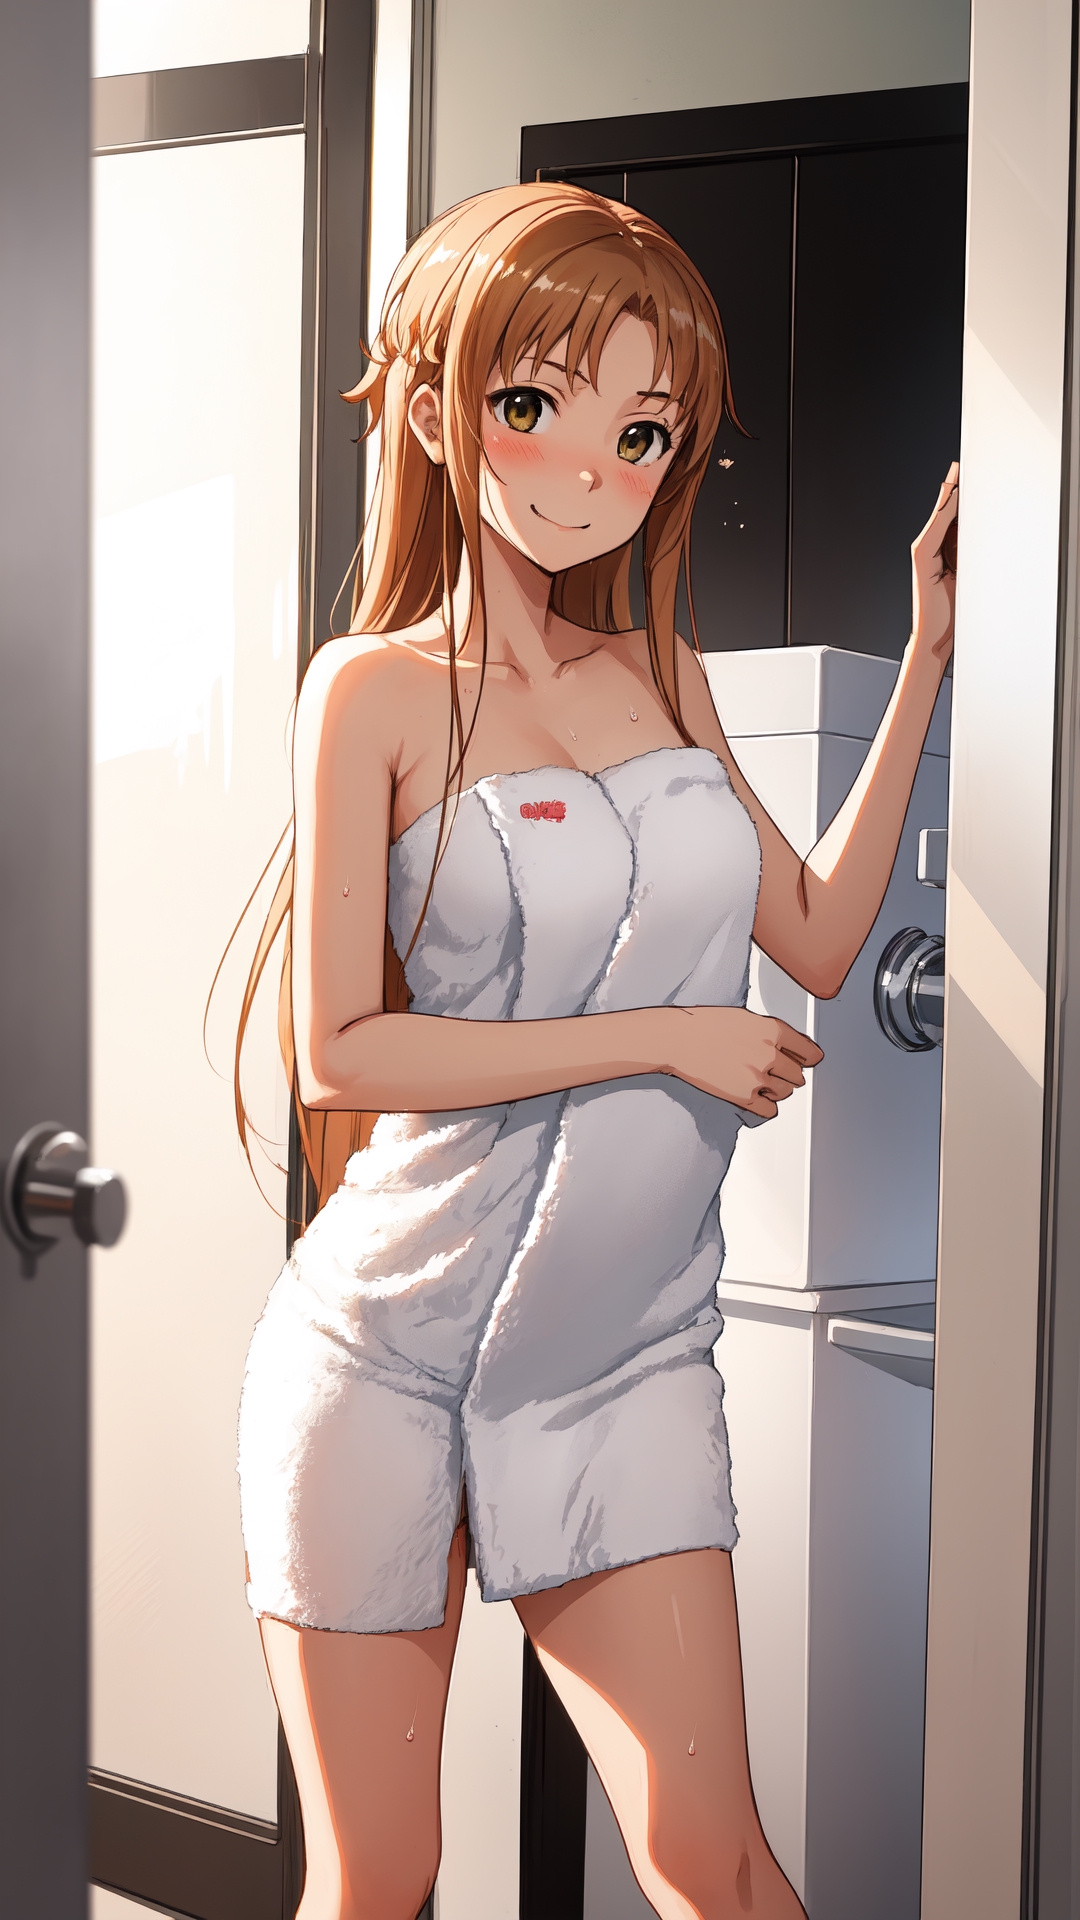 di peterson recommends sword art online asuna naked pic